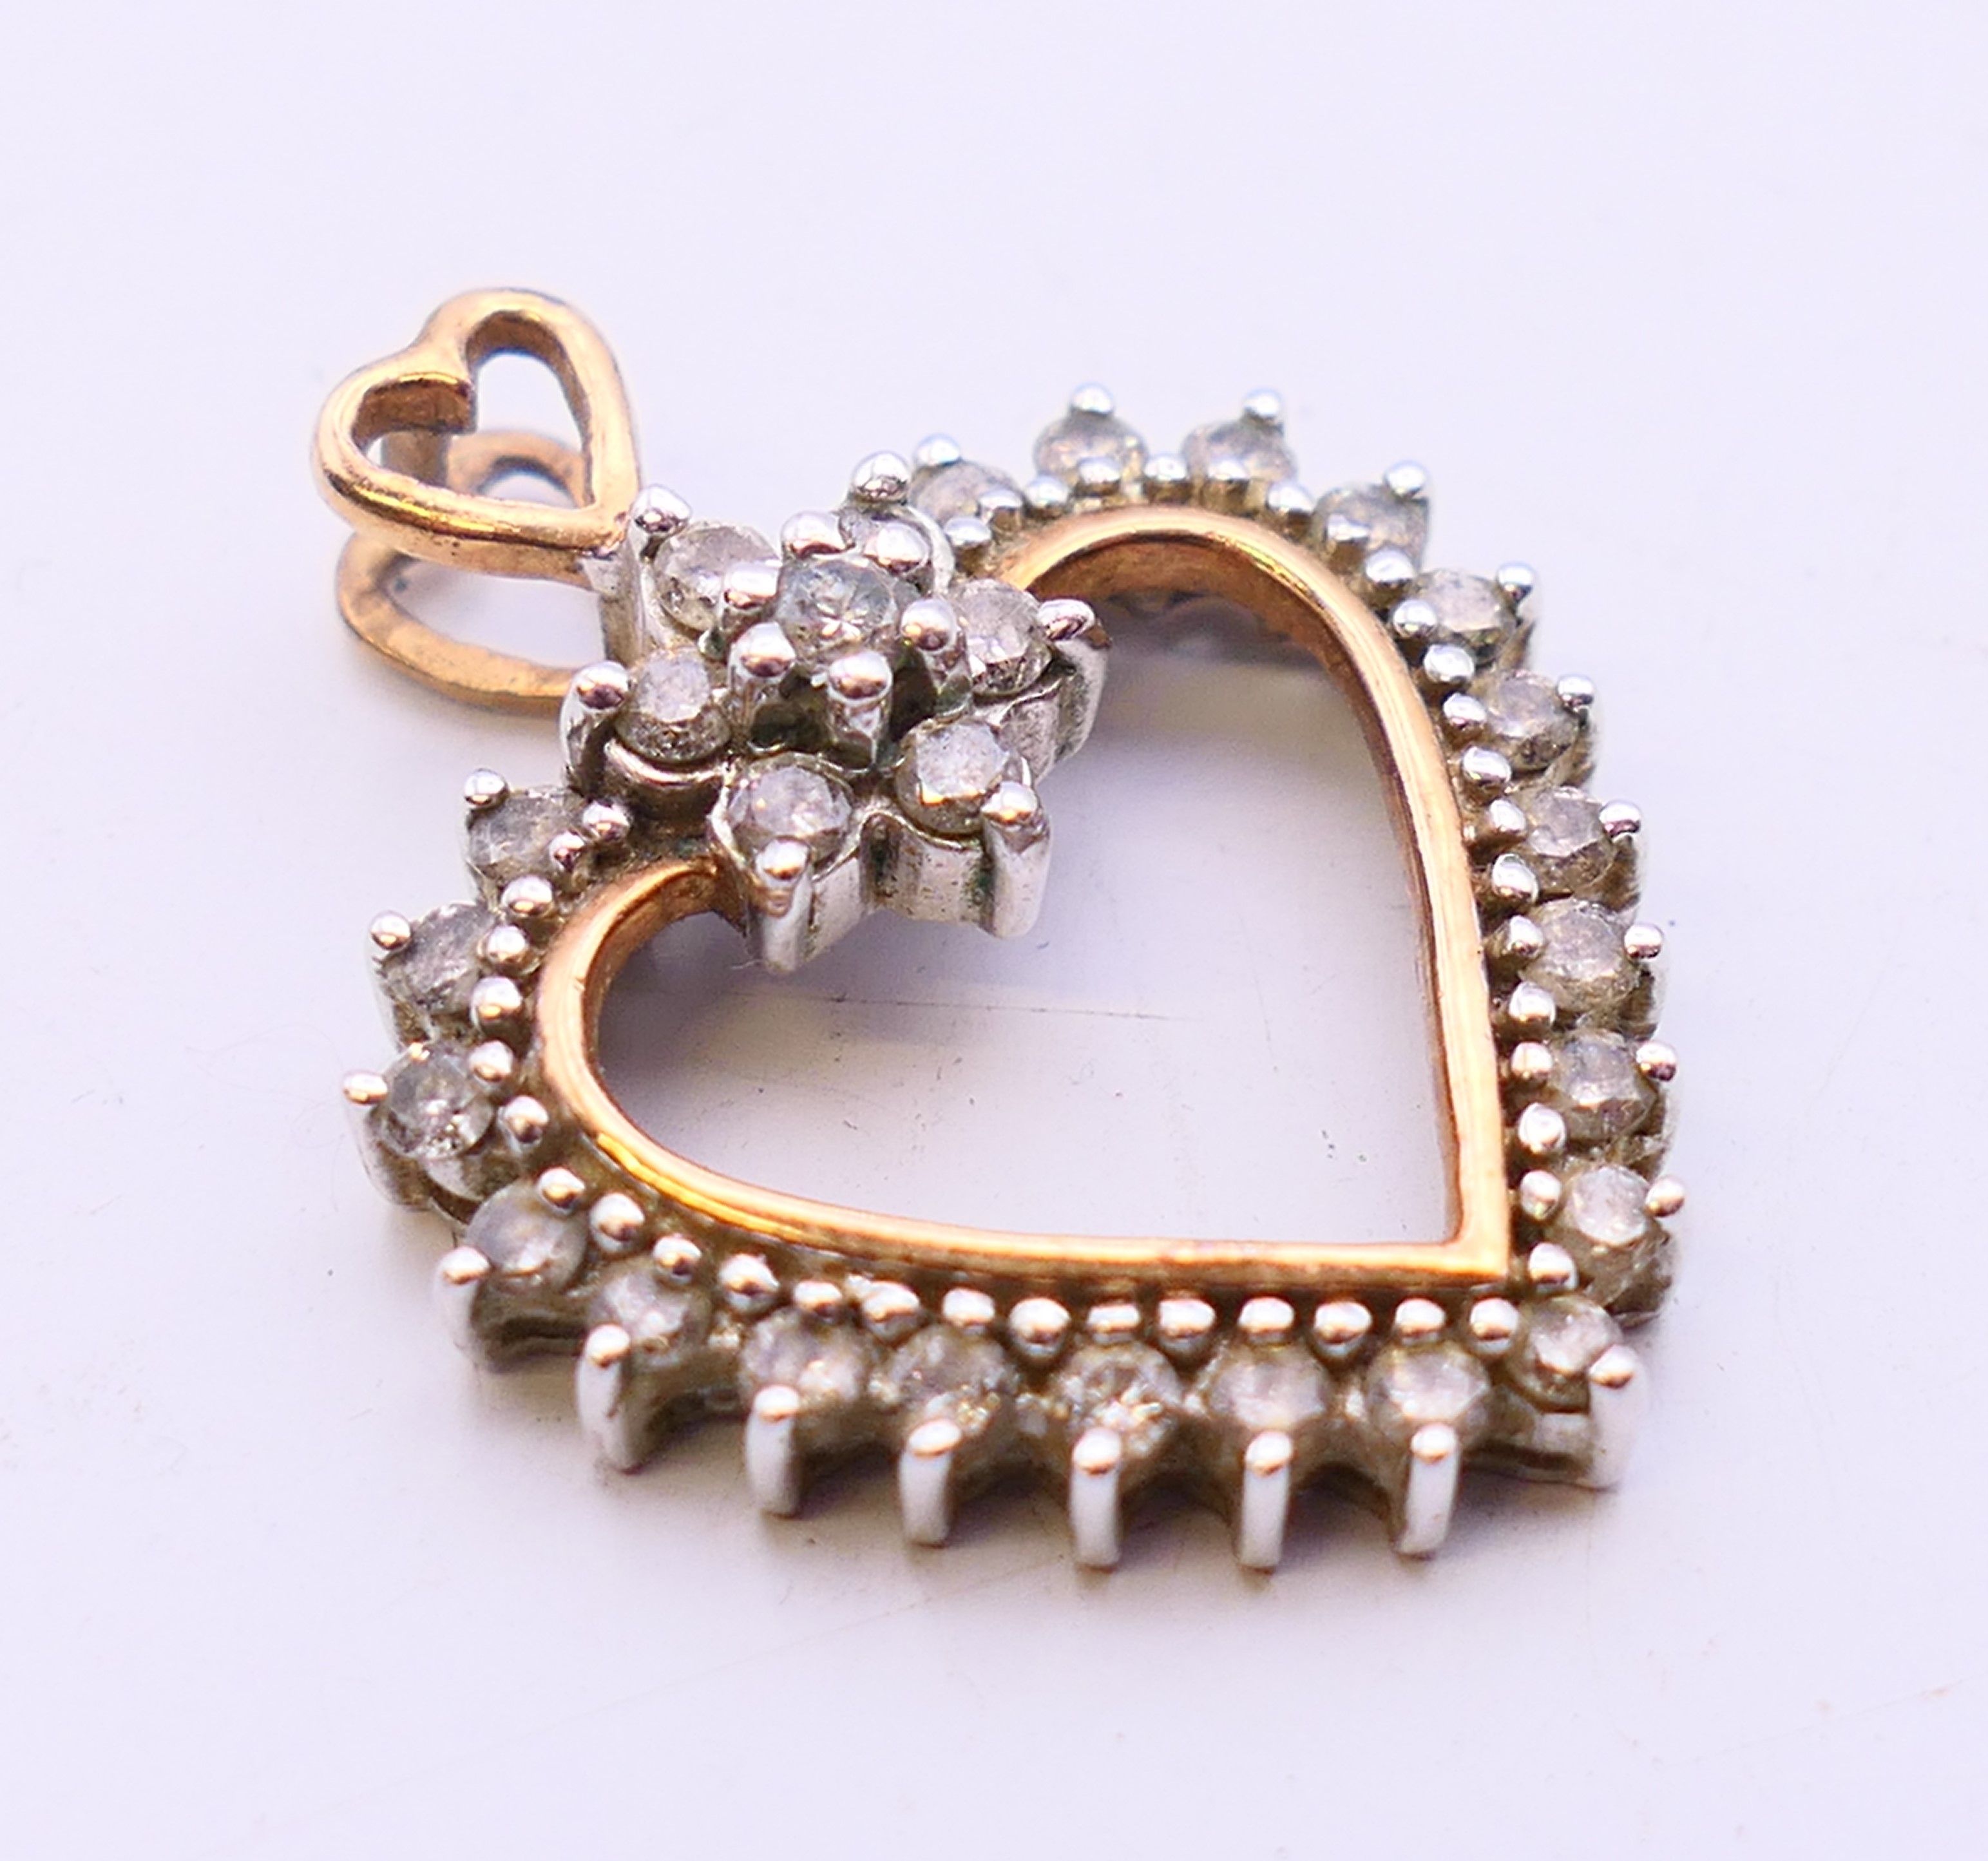 A 9 ct gold heart pendant. 3 cm high. - Image 2 of 5